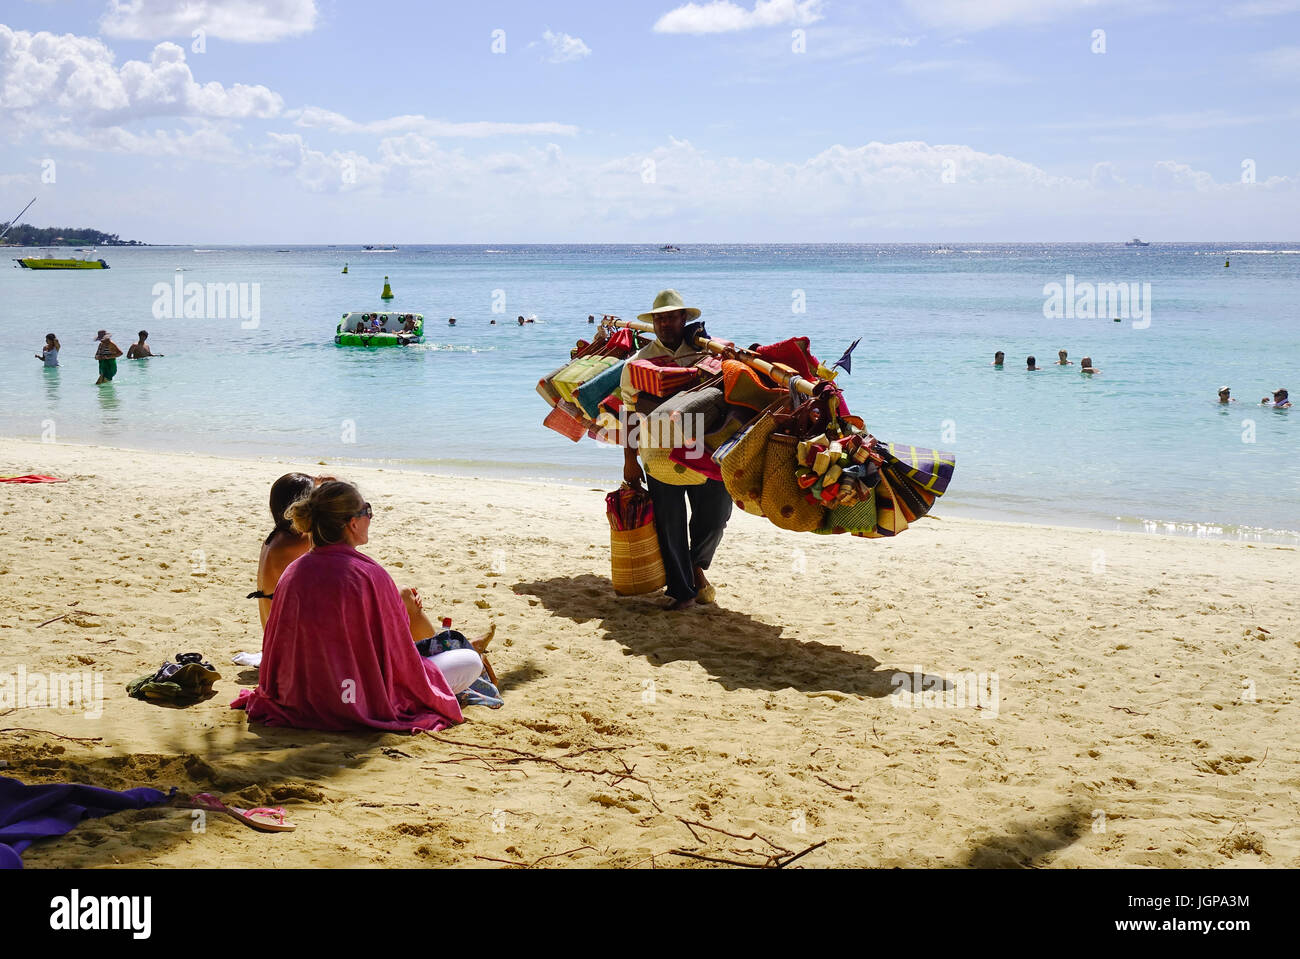 Pamplemousses, Mauritius - Jan 4, 2017. Vendor selling souvenirs on beach at sunny day in Trou aux Biches, Mauritius. The beach is one of the most bea Stock Photo